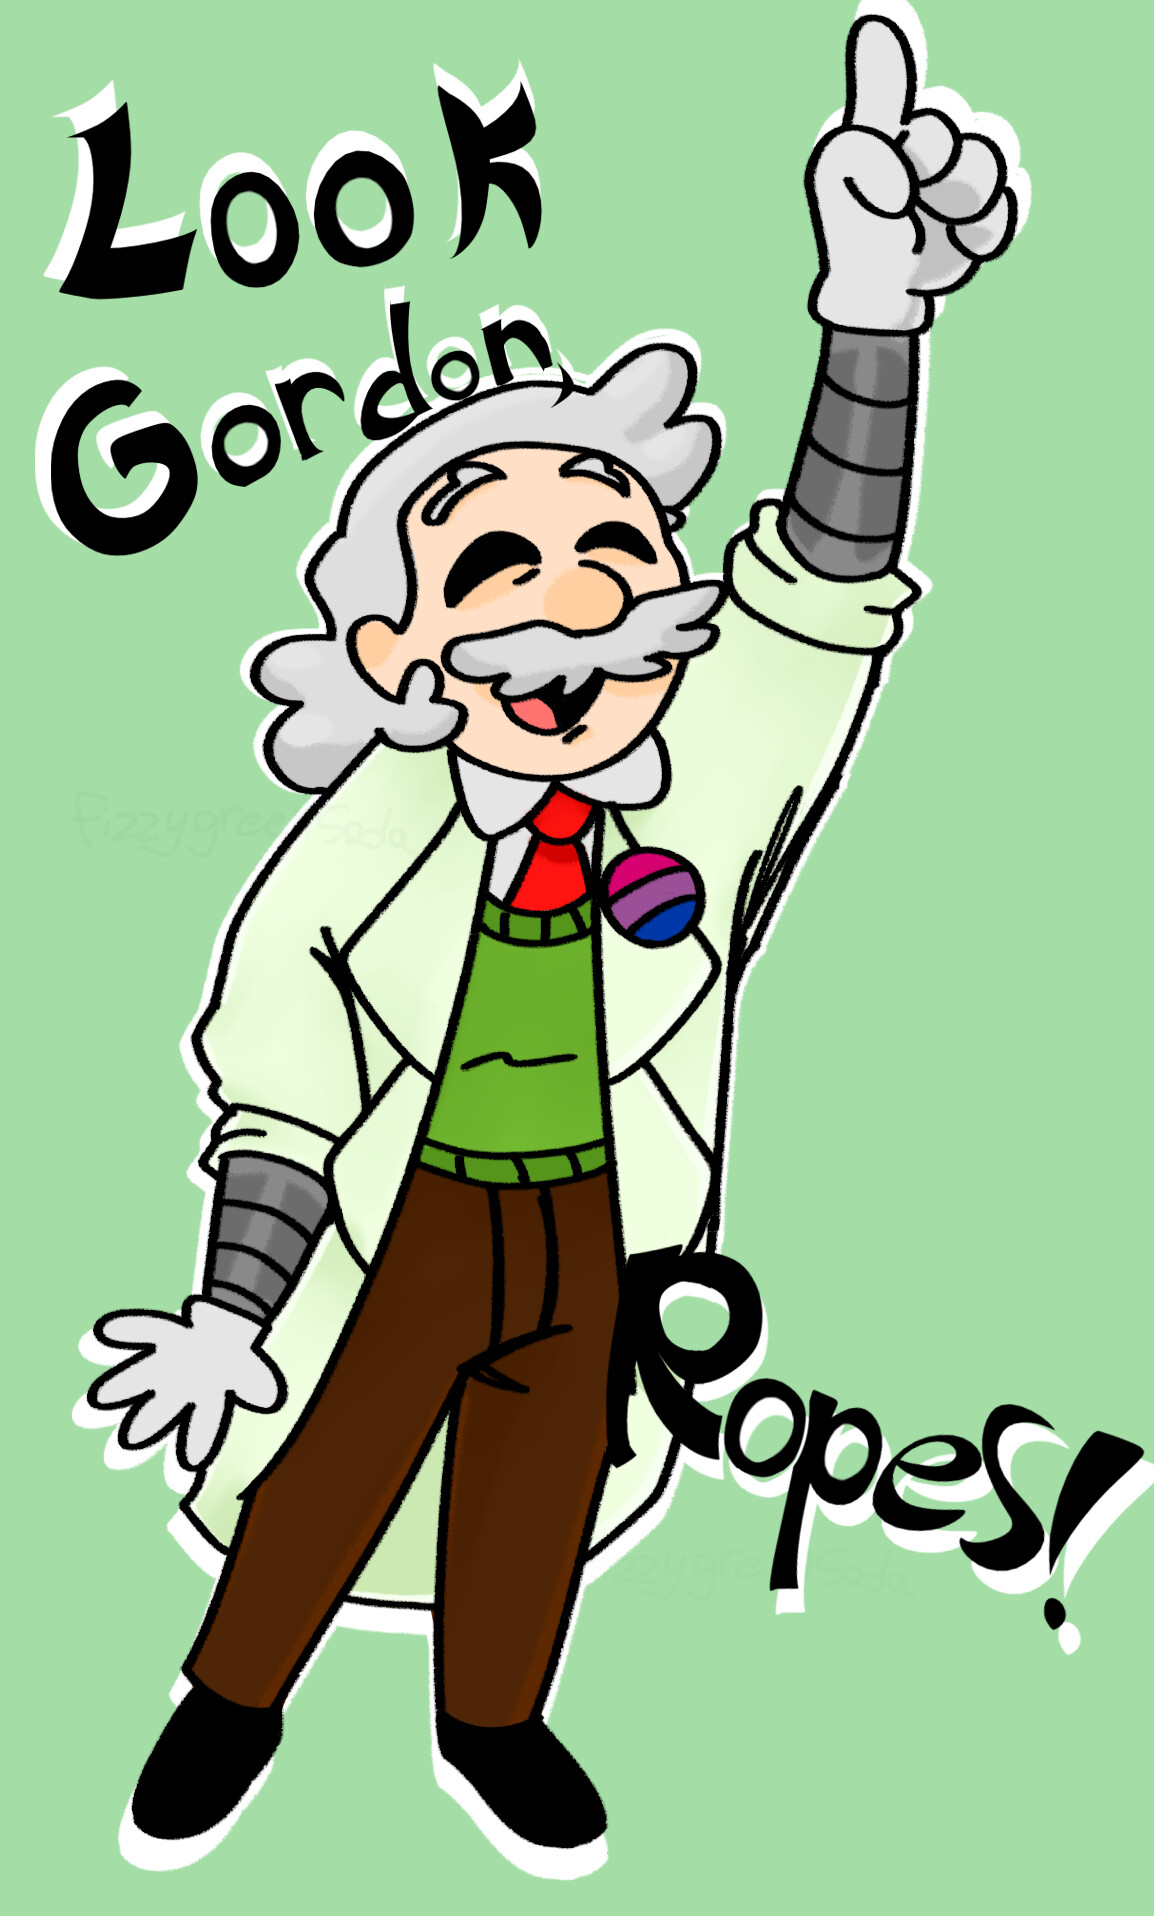 Dr. Coomer by tiranoale on DeviantArt